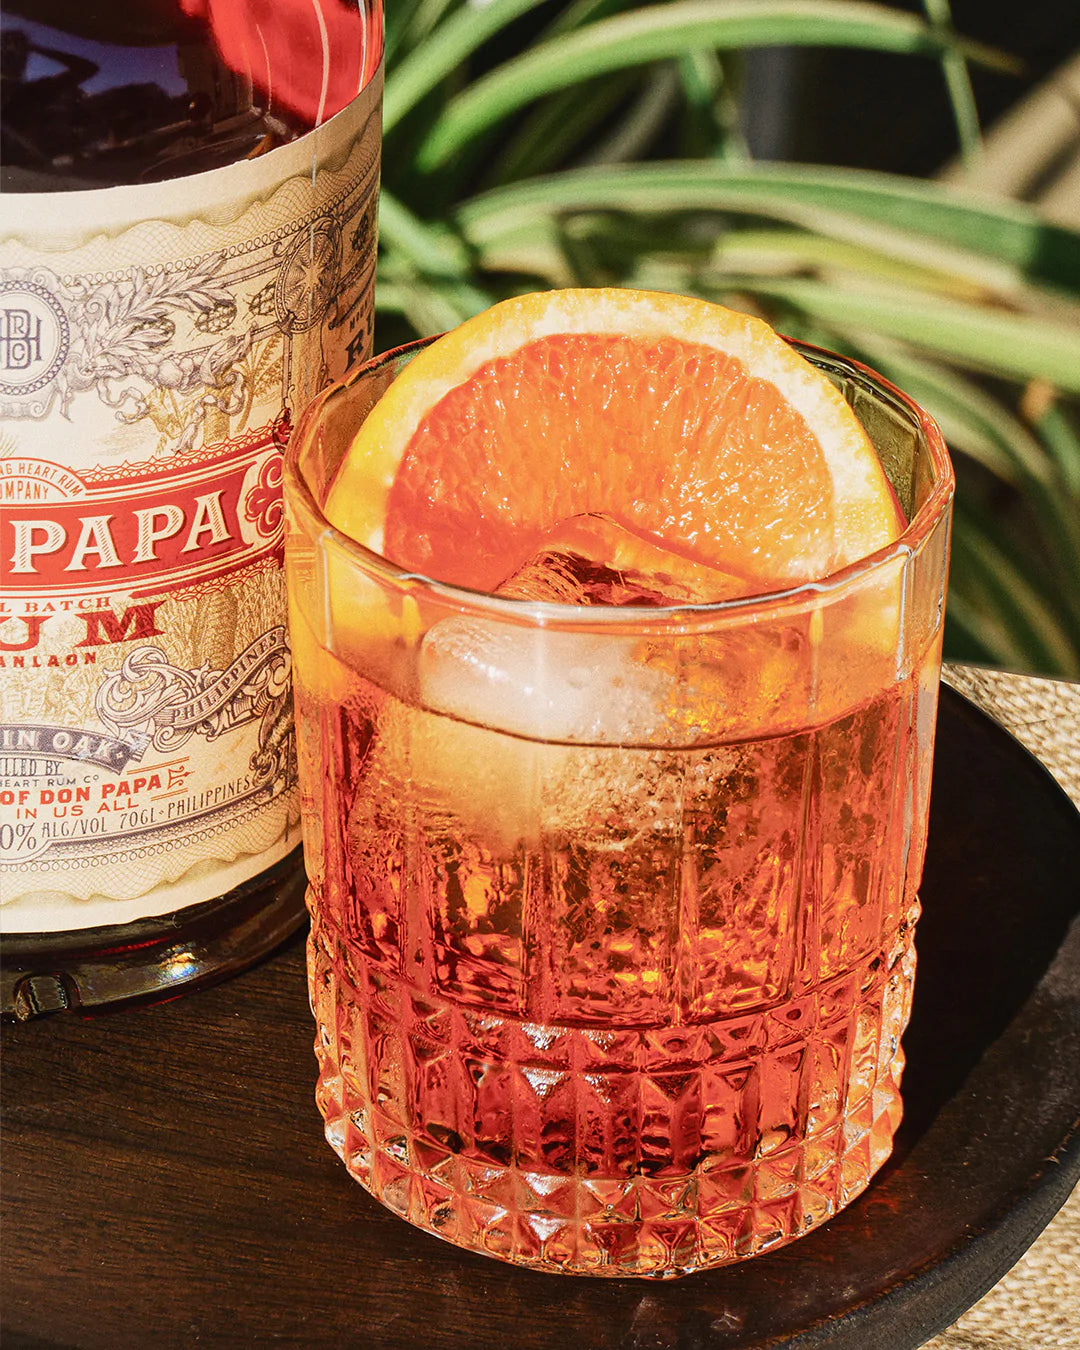 Don Papa Rum 10 year old - Small Batch from the Philippines - 43% -  Bleeding Heart Rum Company